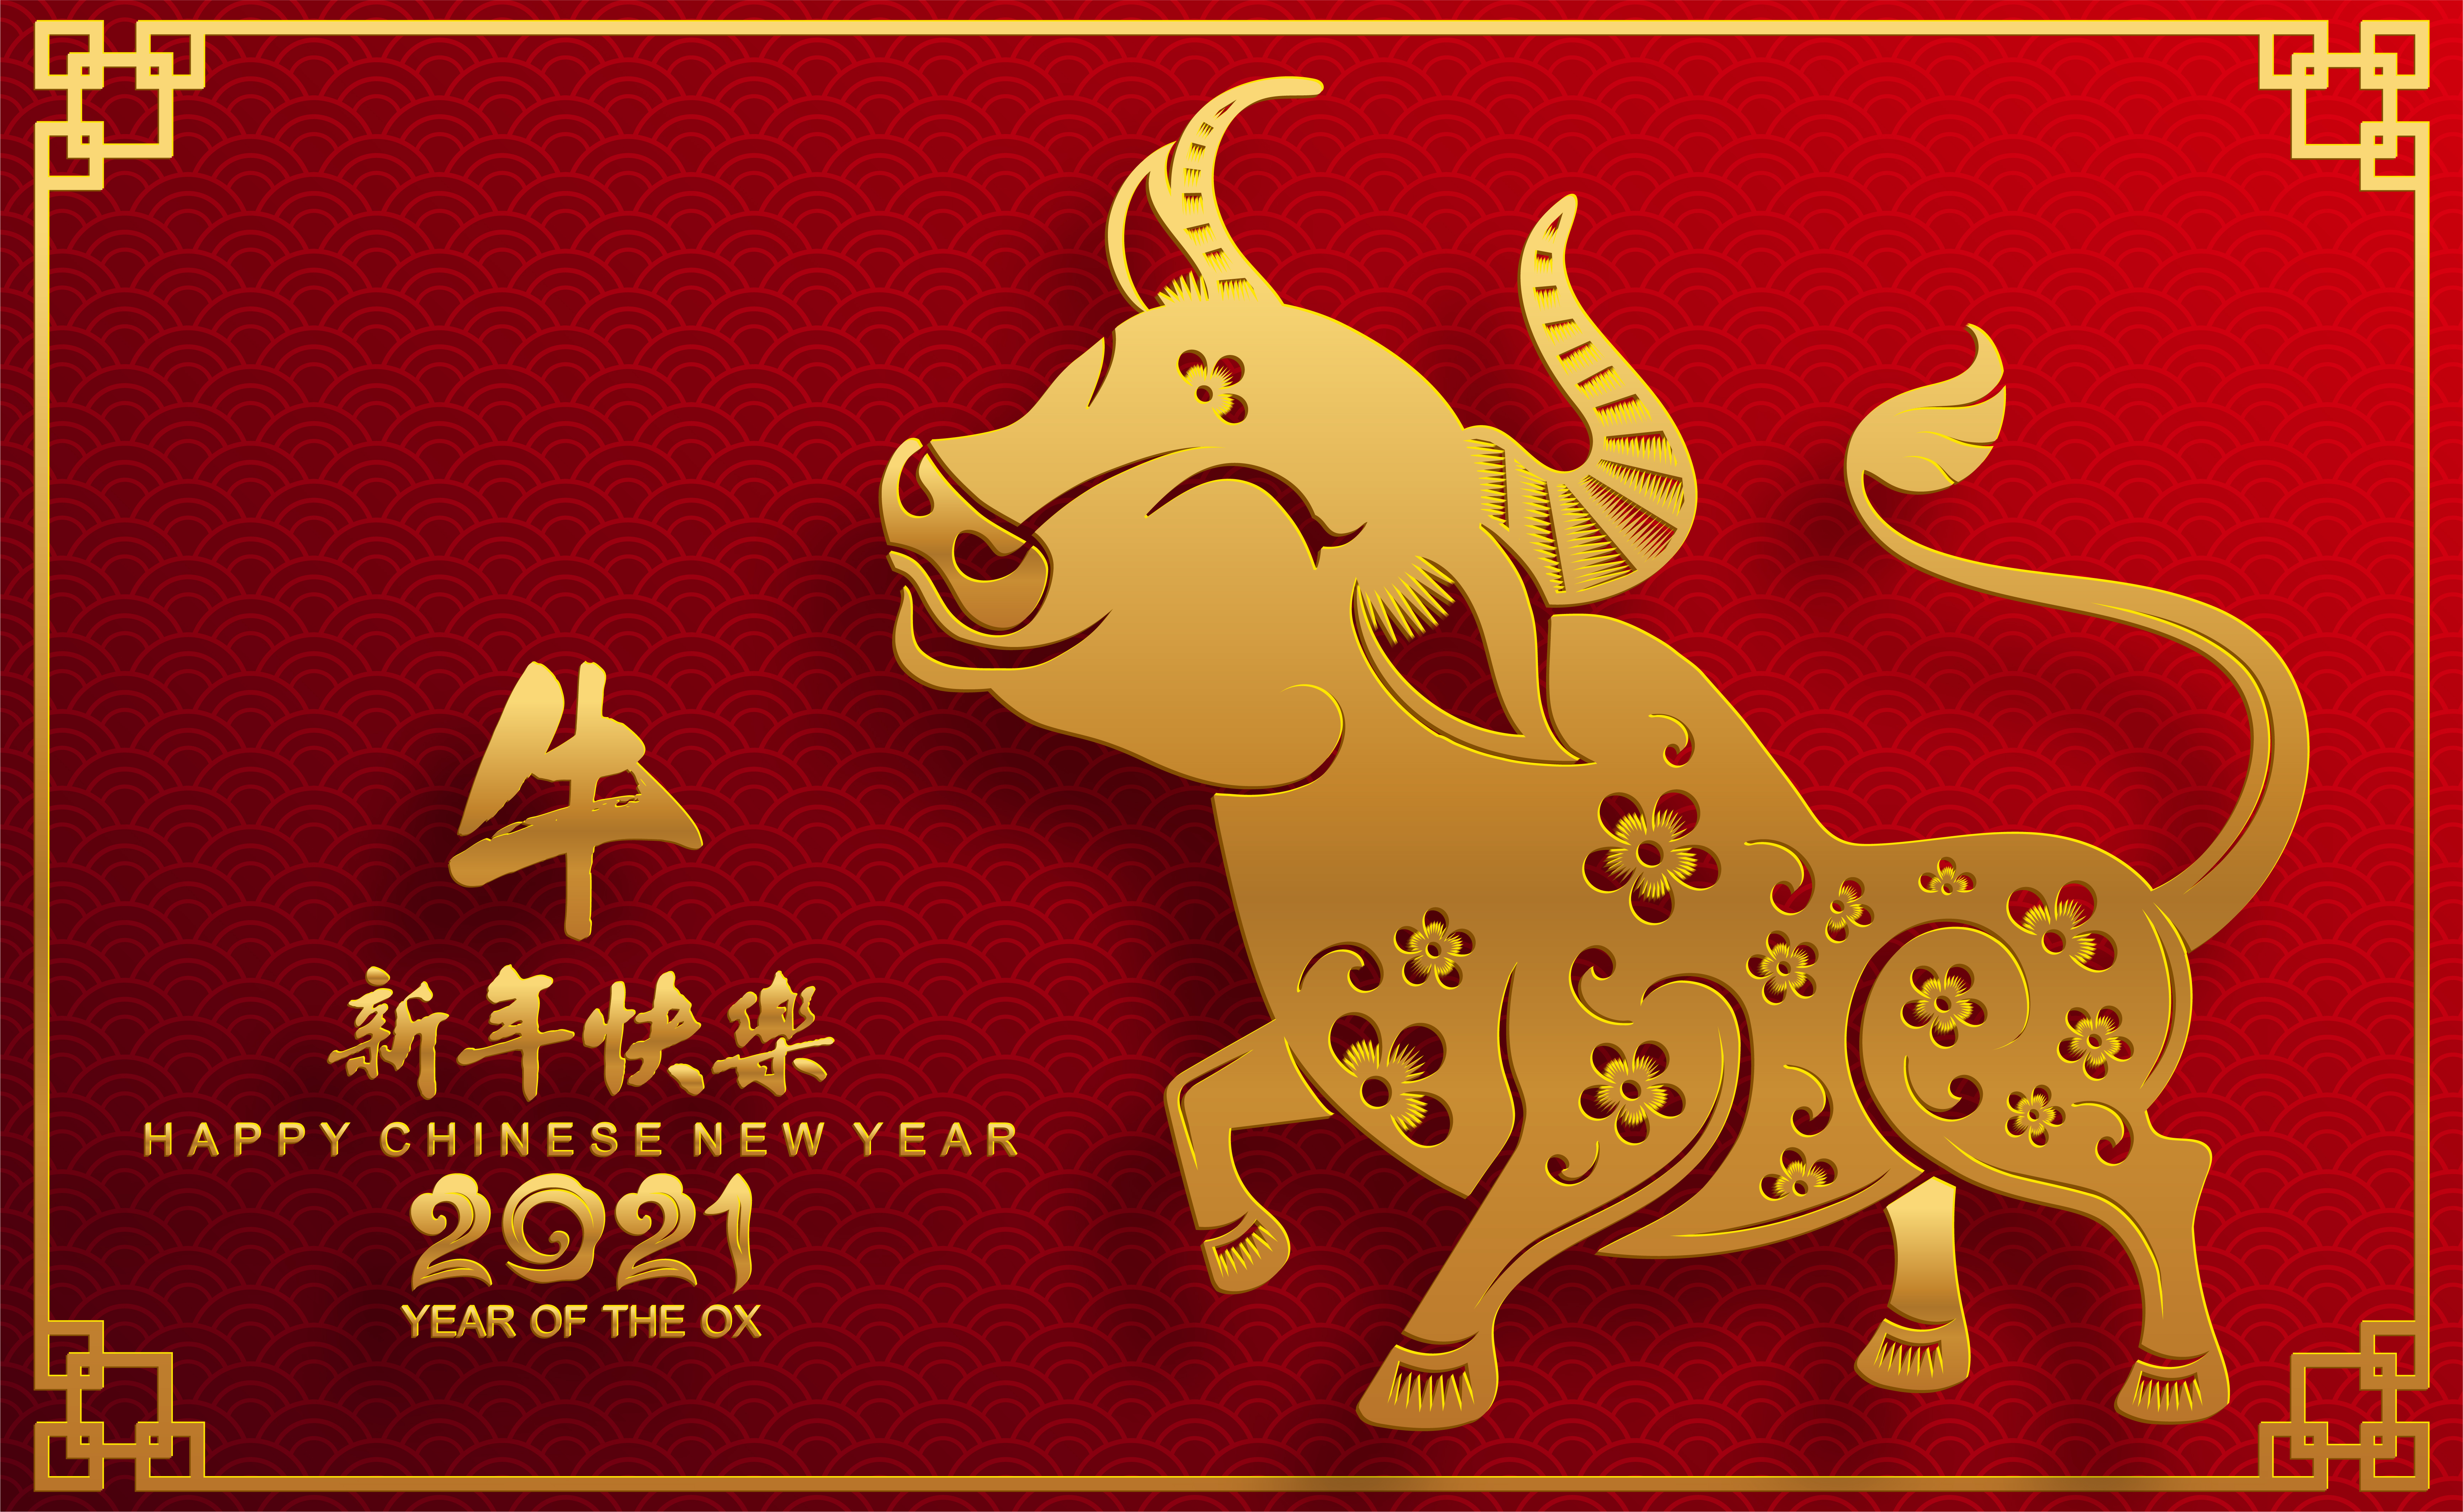 Chinese new year 2021 design with golden ox - Download ...